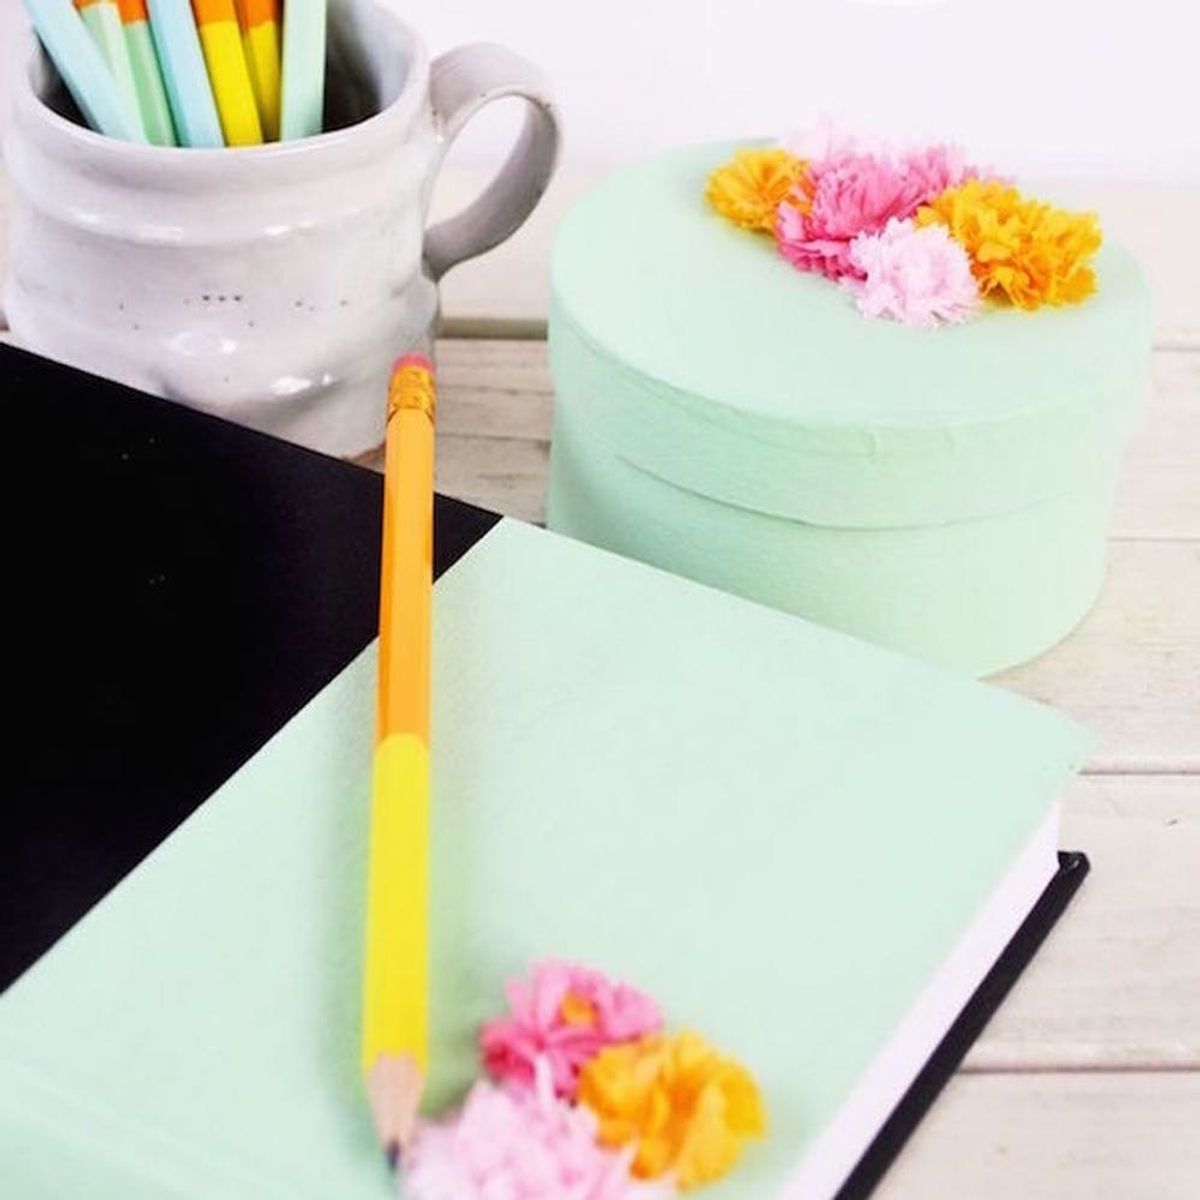 17 Ways to Give Your Workspace a Summer Makeover